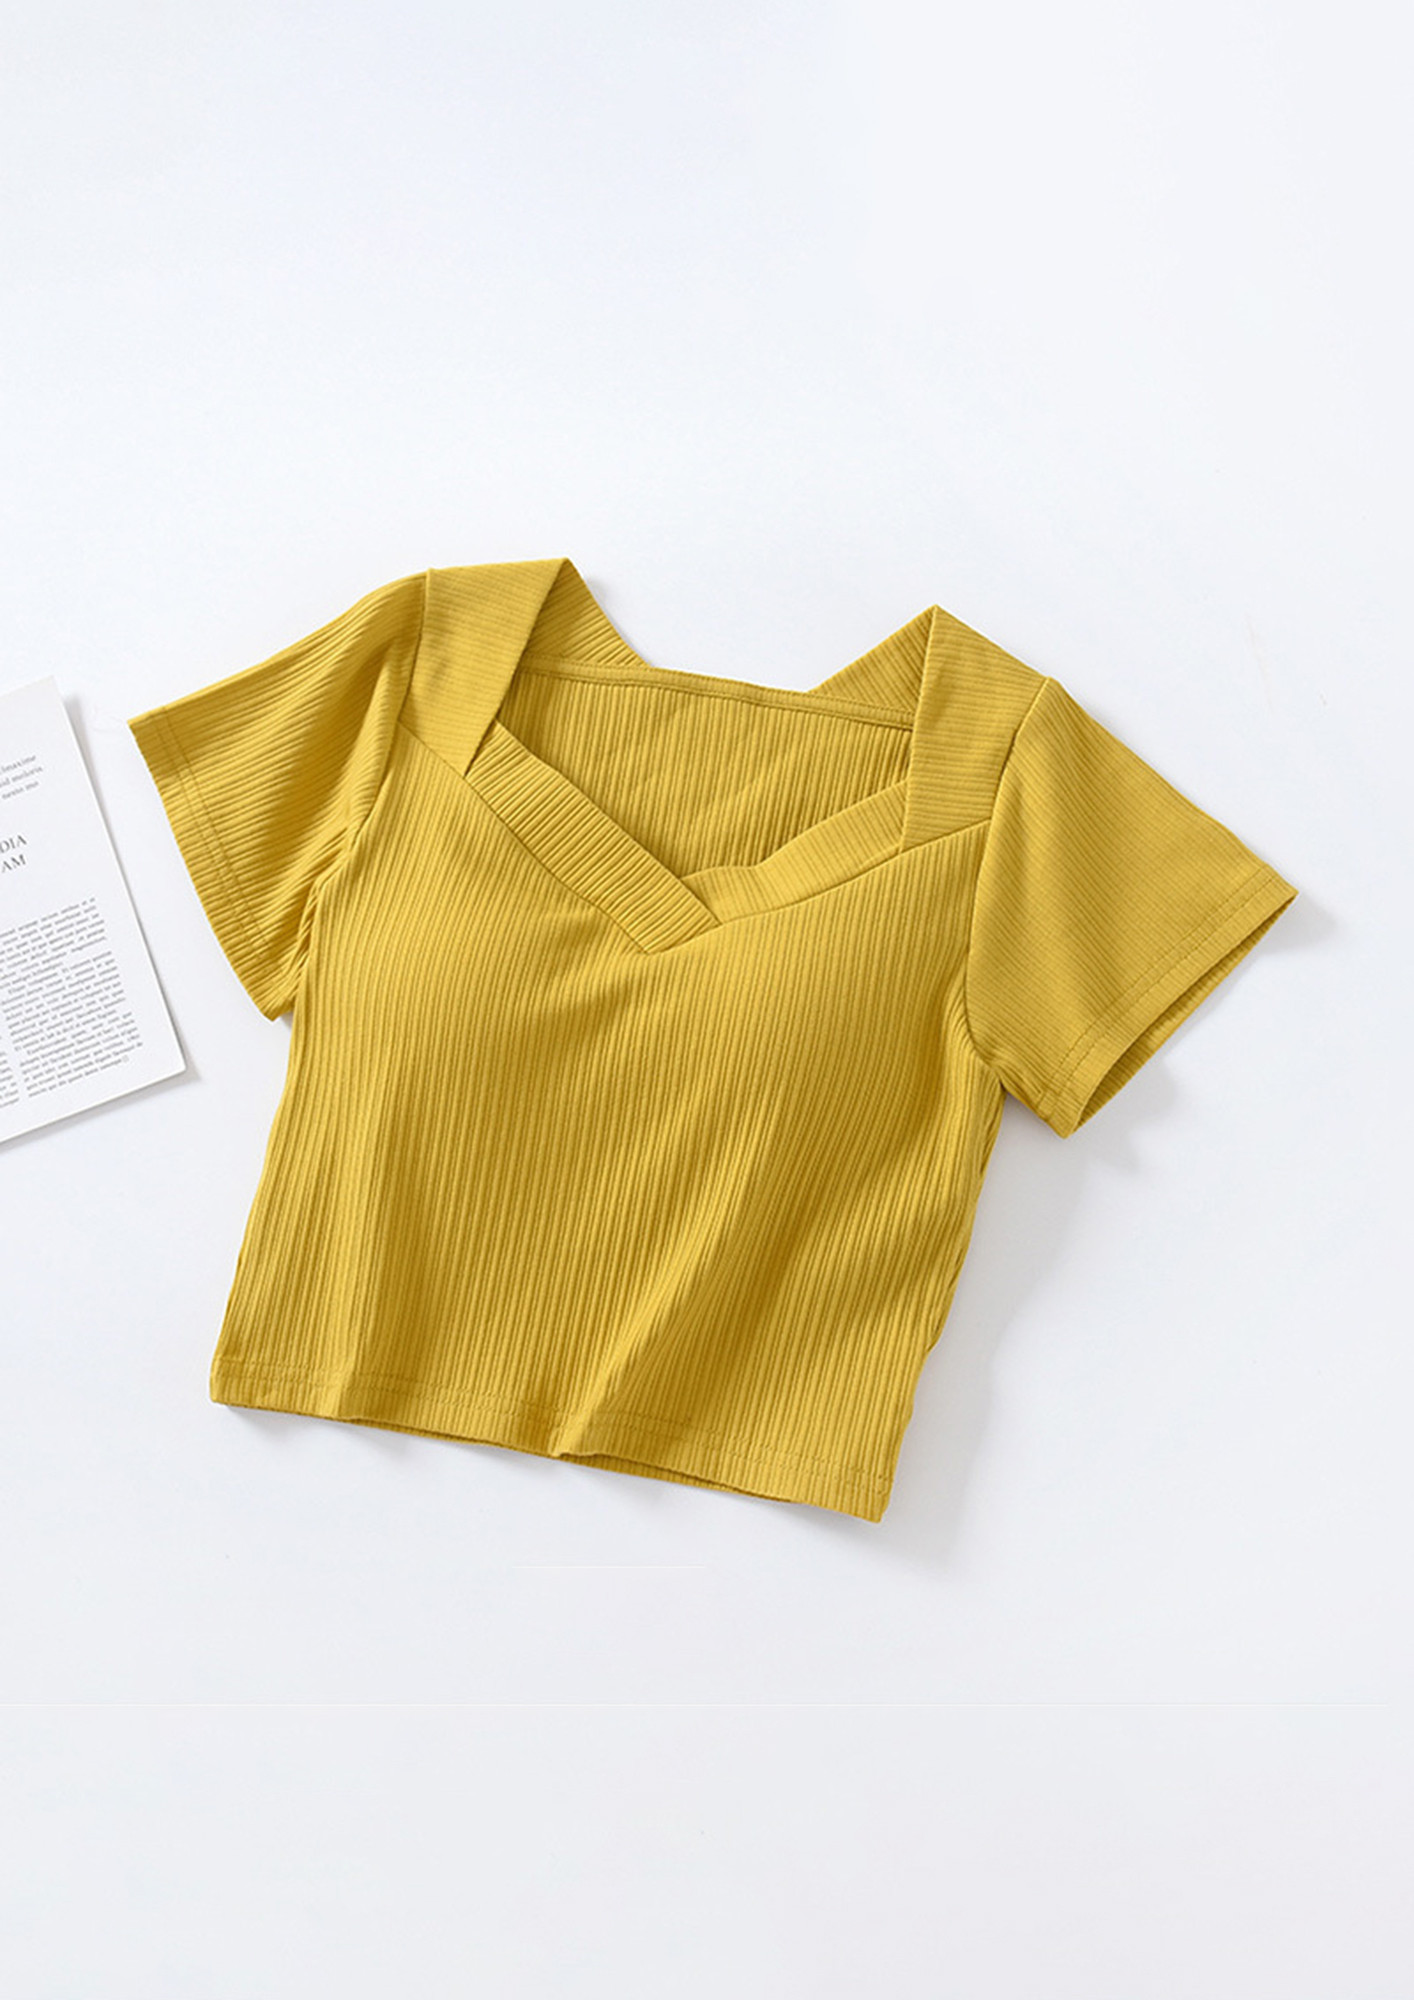 BLANK SPACE YELLOW CROP TOP